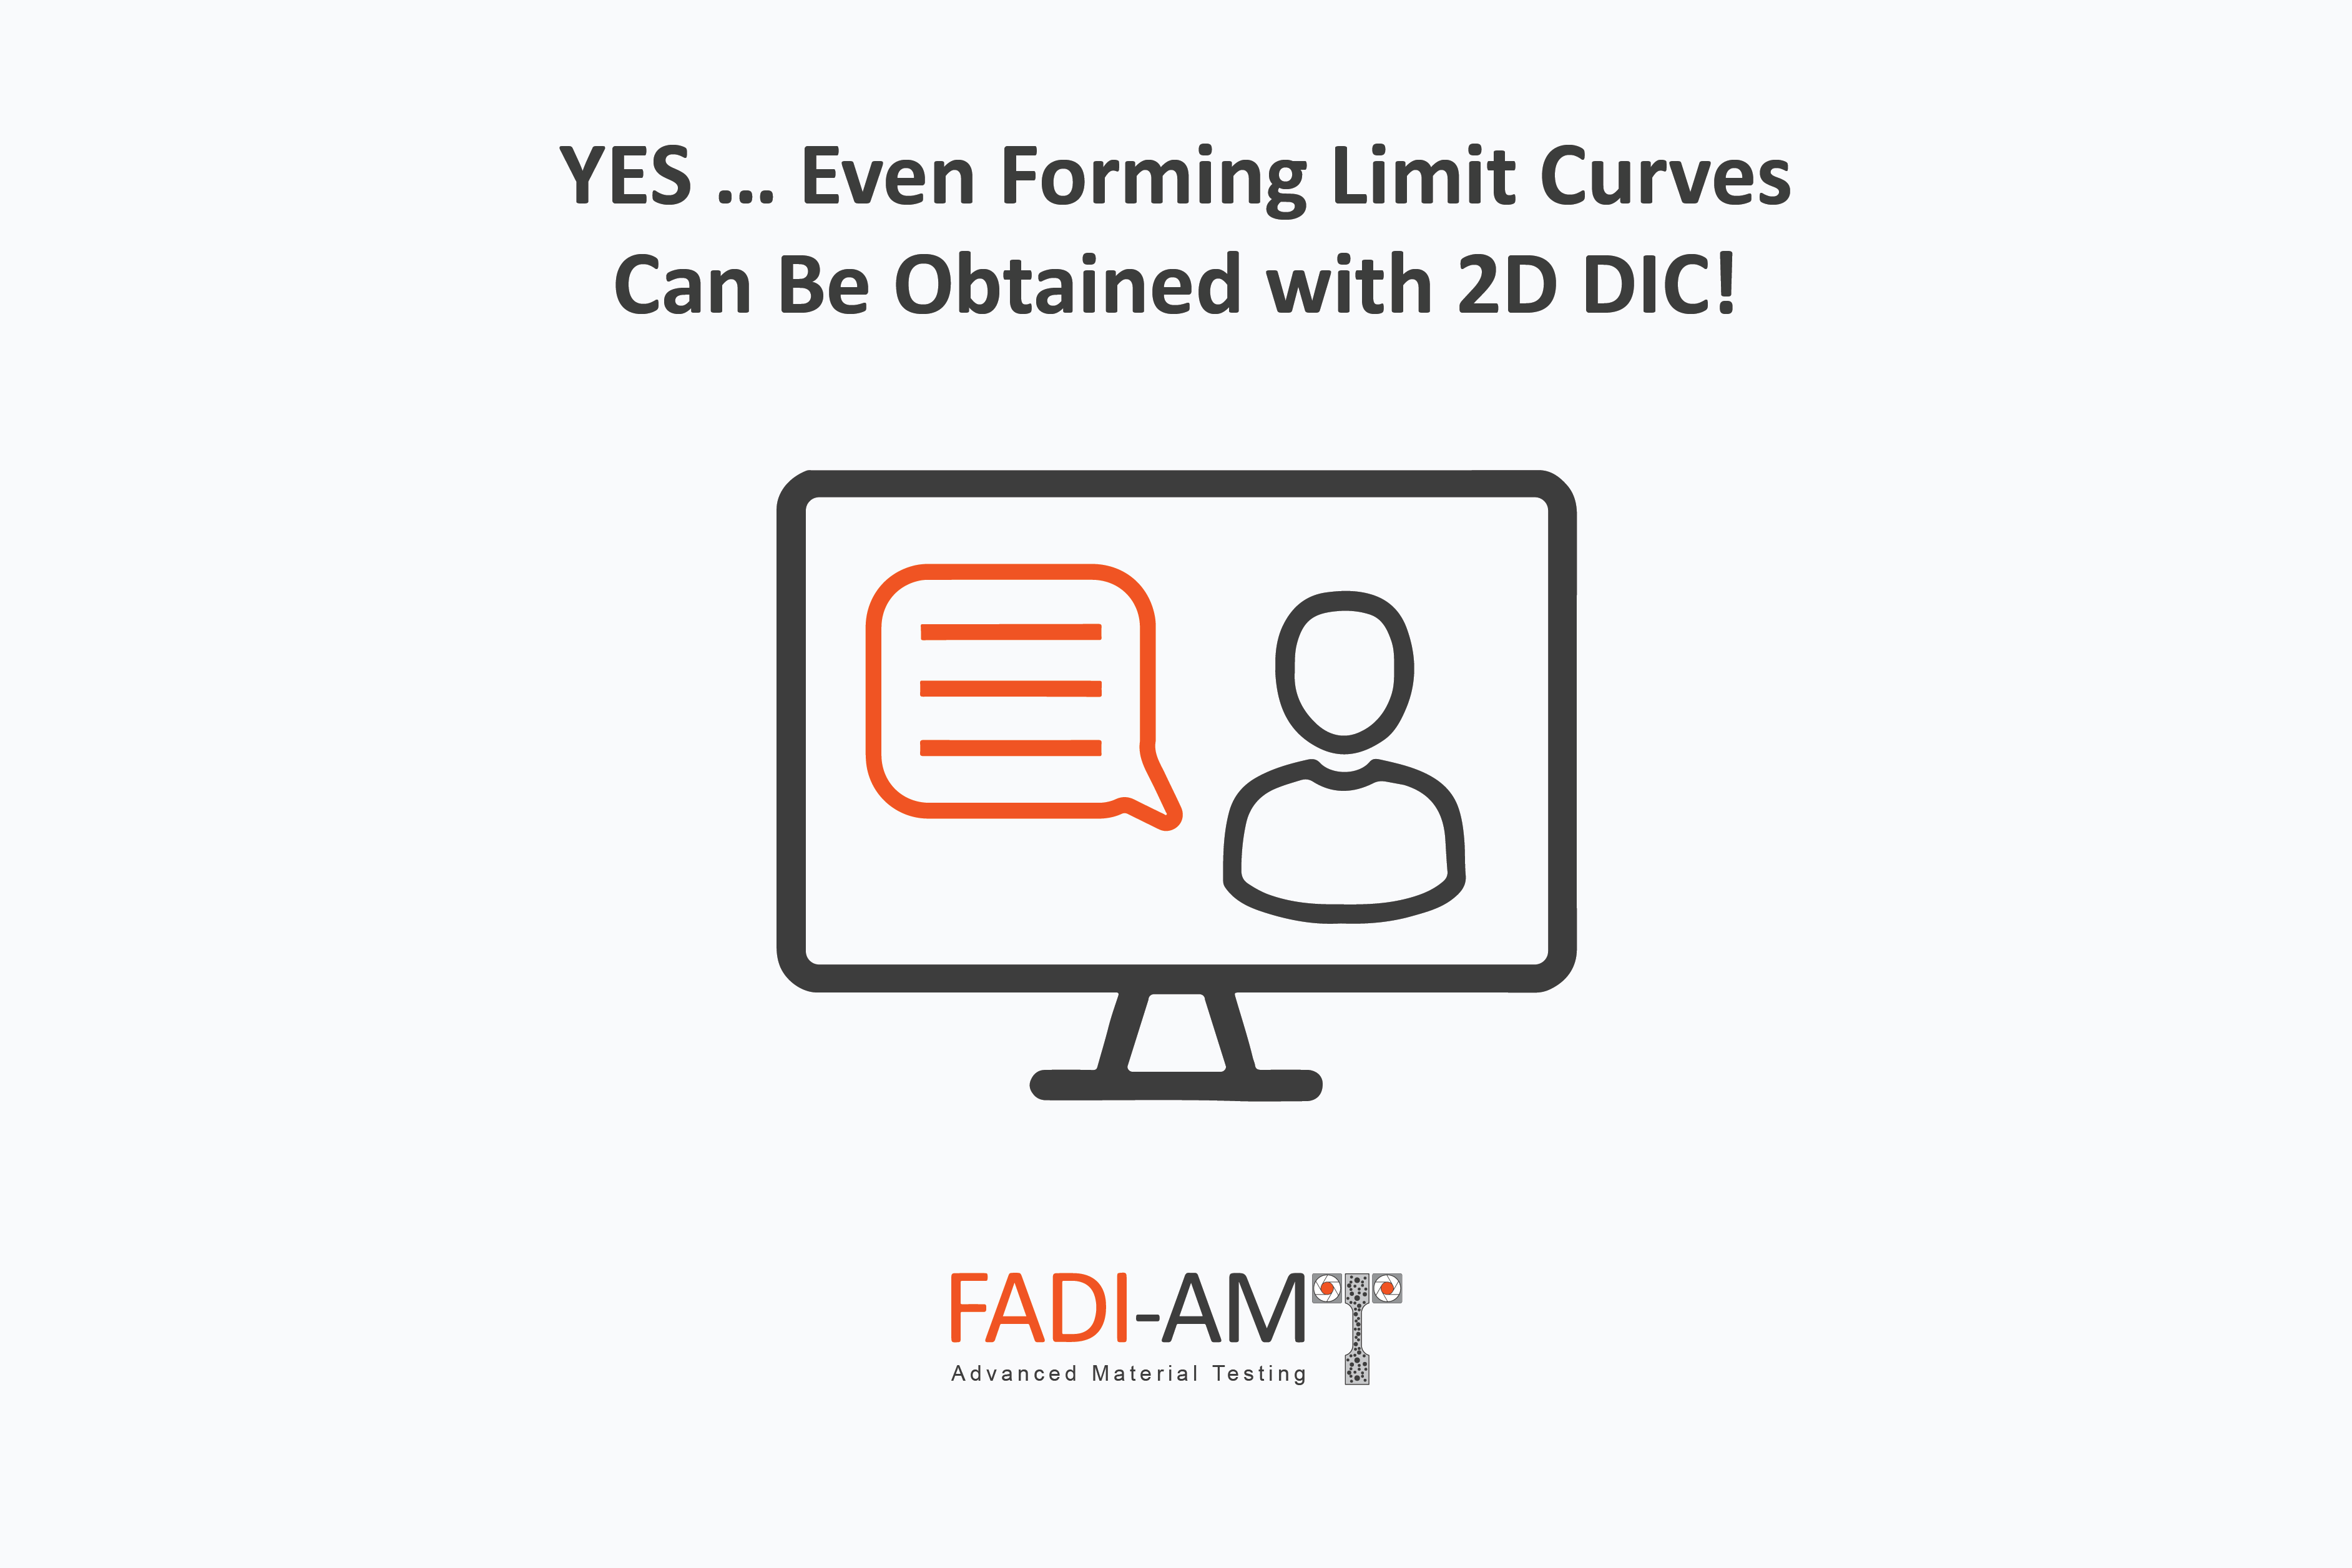 YES … Even Forming Limit Curves Can Be Obtained with 2D DIC!, FADI-AMT Webinar